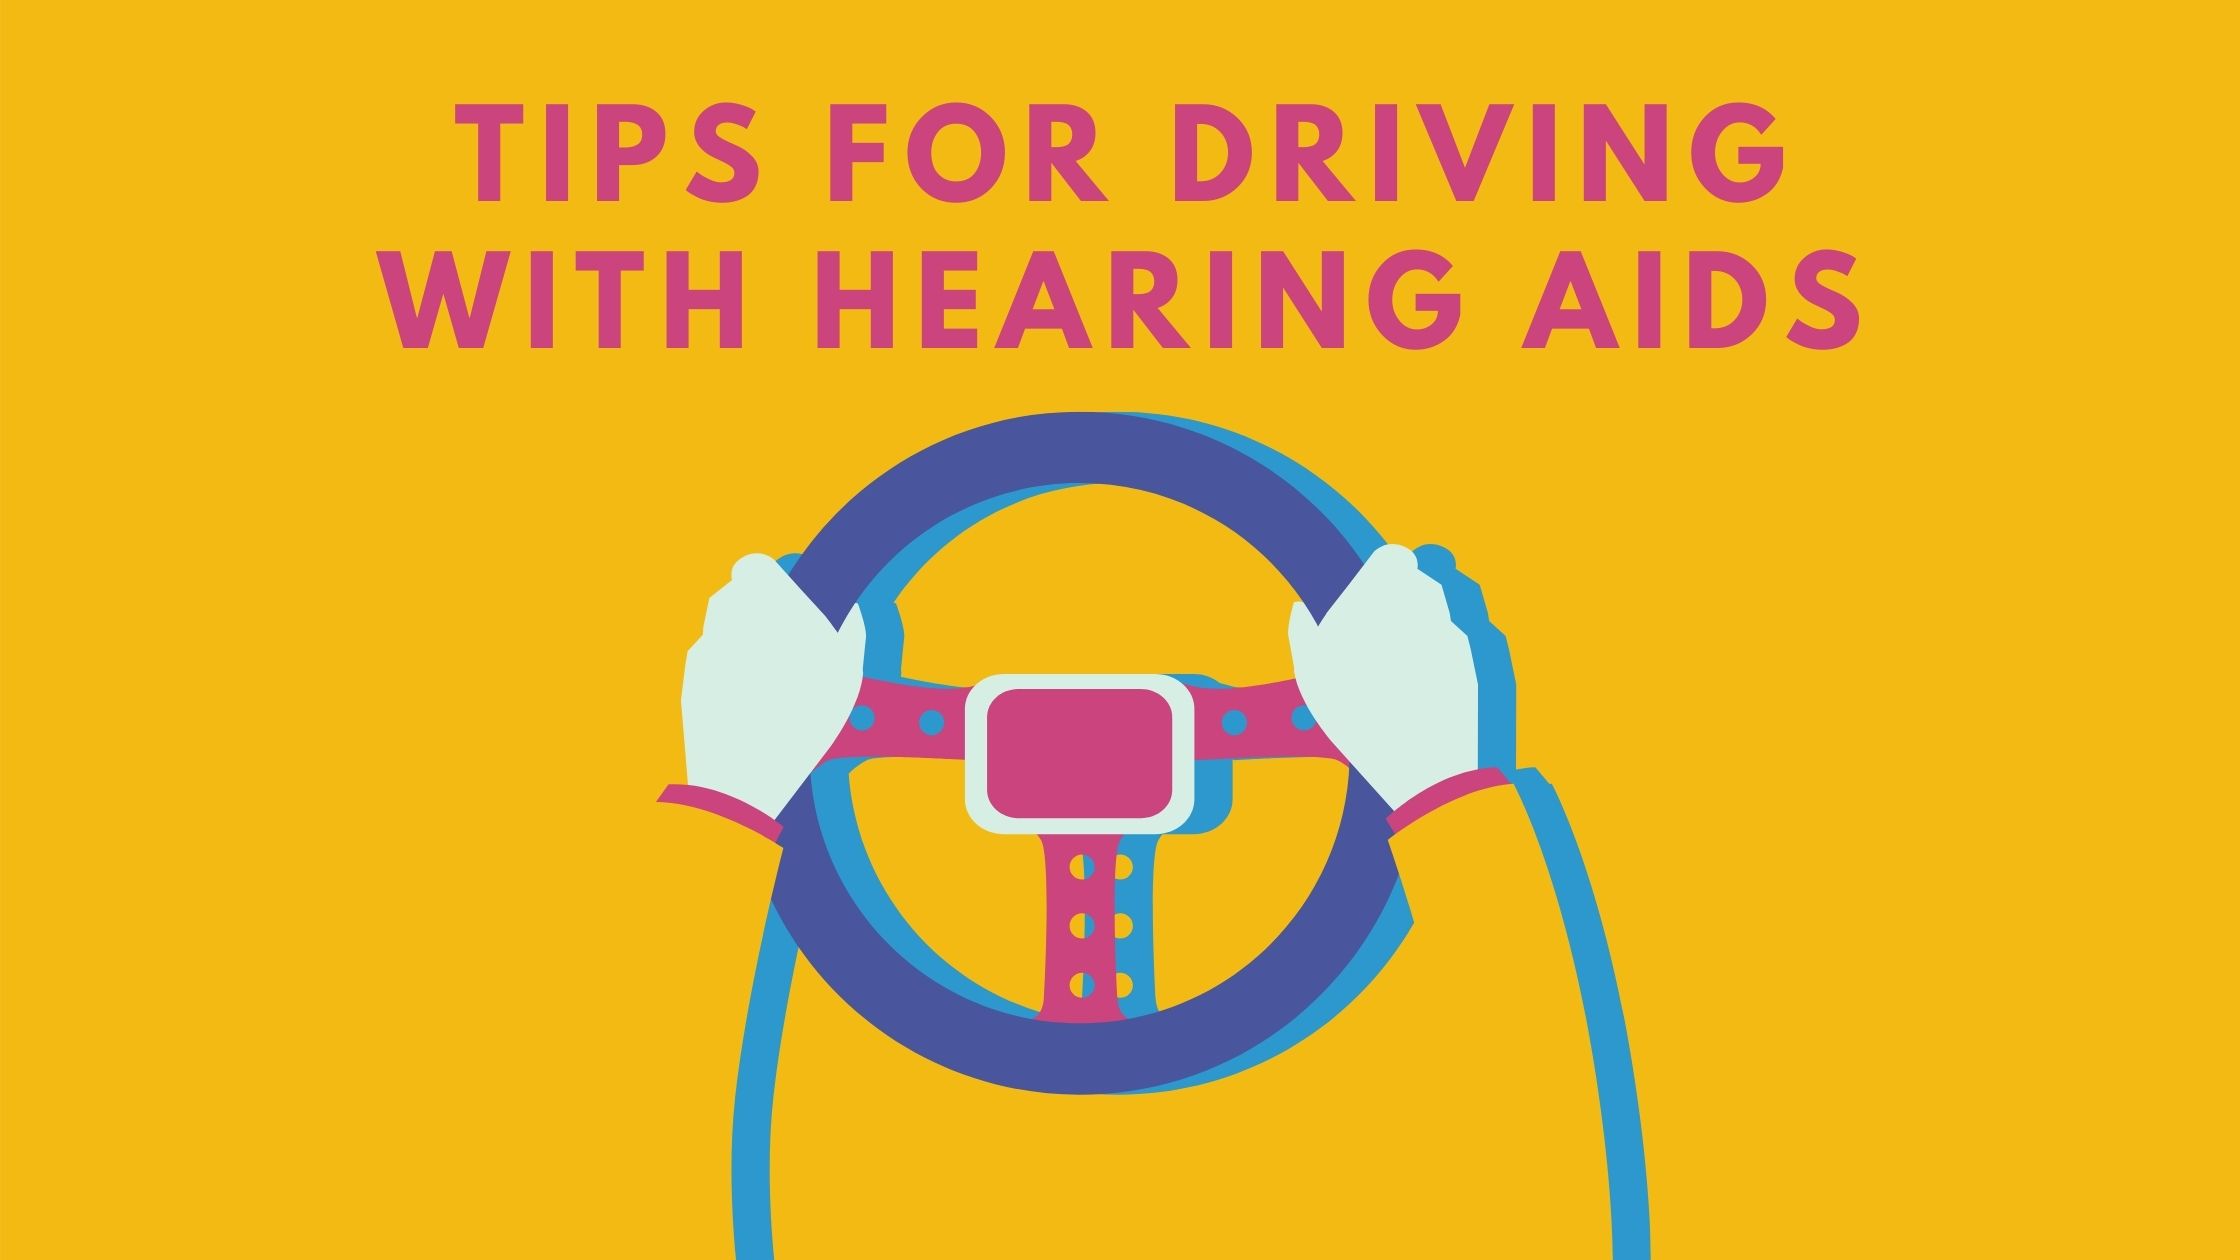 Featured image for “Tips for Driving with Hearing Aids”